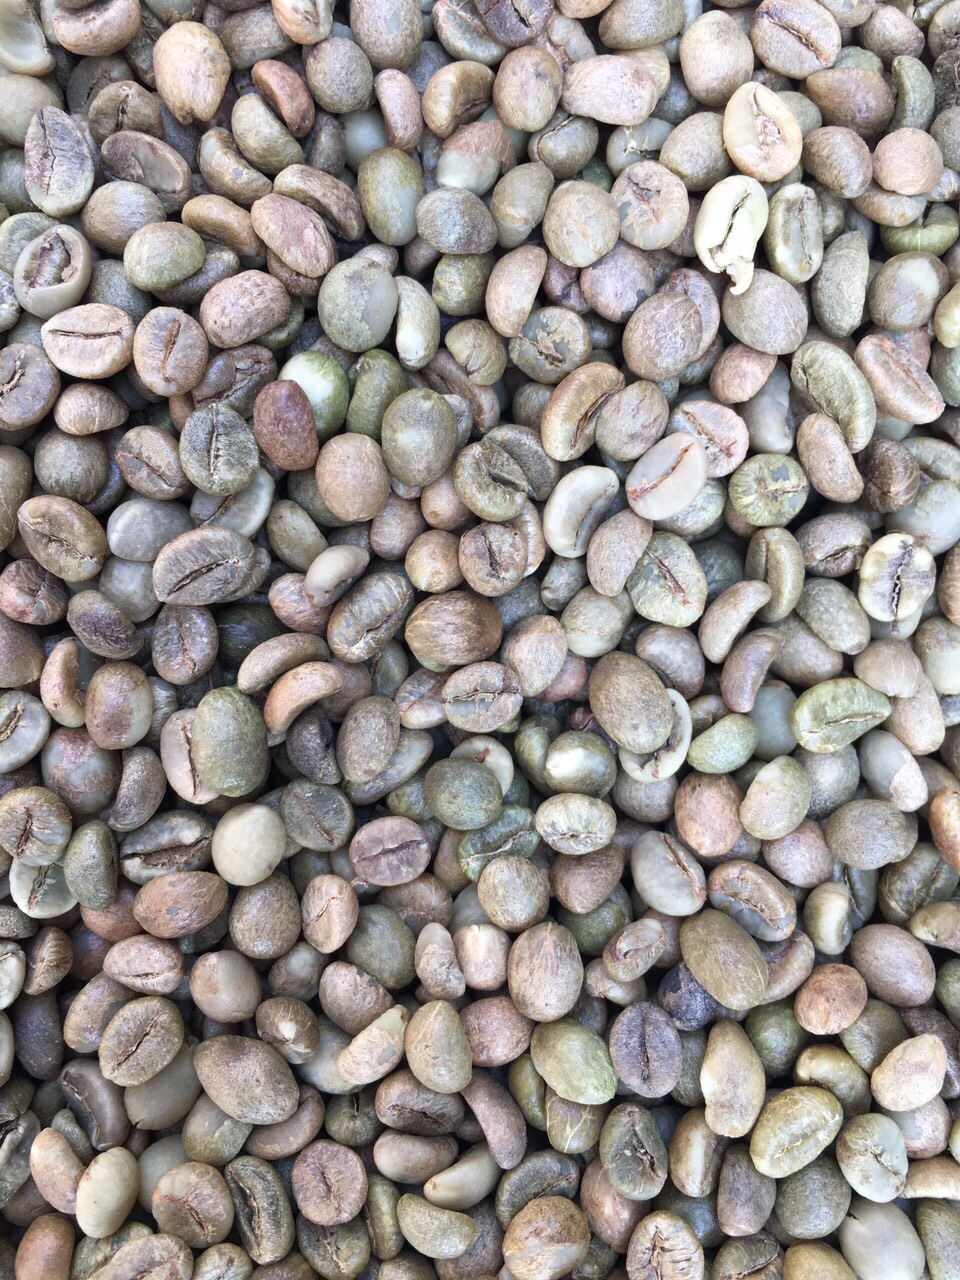 Cleaned Robusta green coffee beans S18